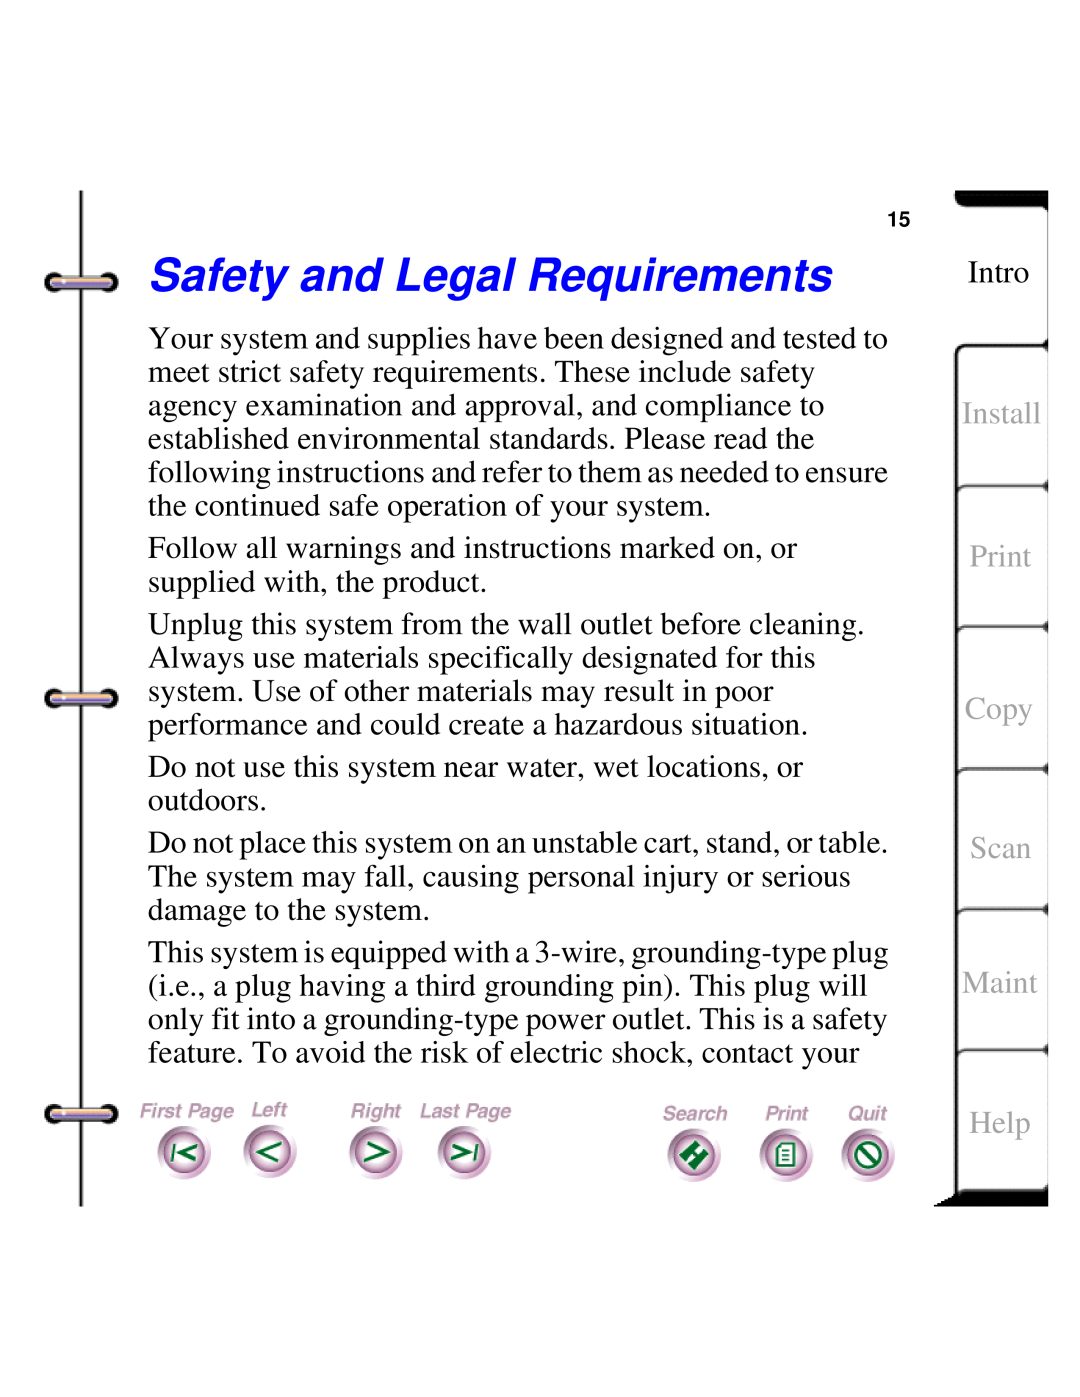 Xerox Document HomeCentre manual Safety and Legal Requirements, Install Print Copy Scan Maint Help 